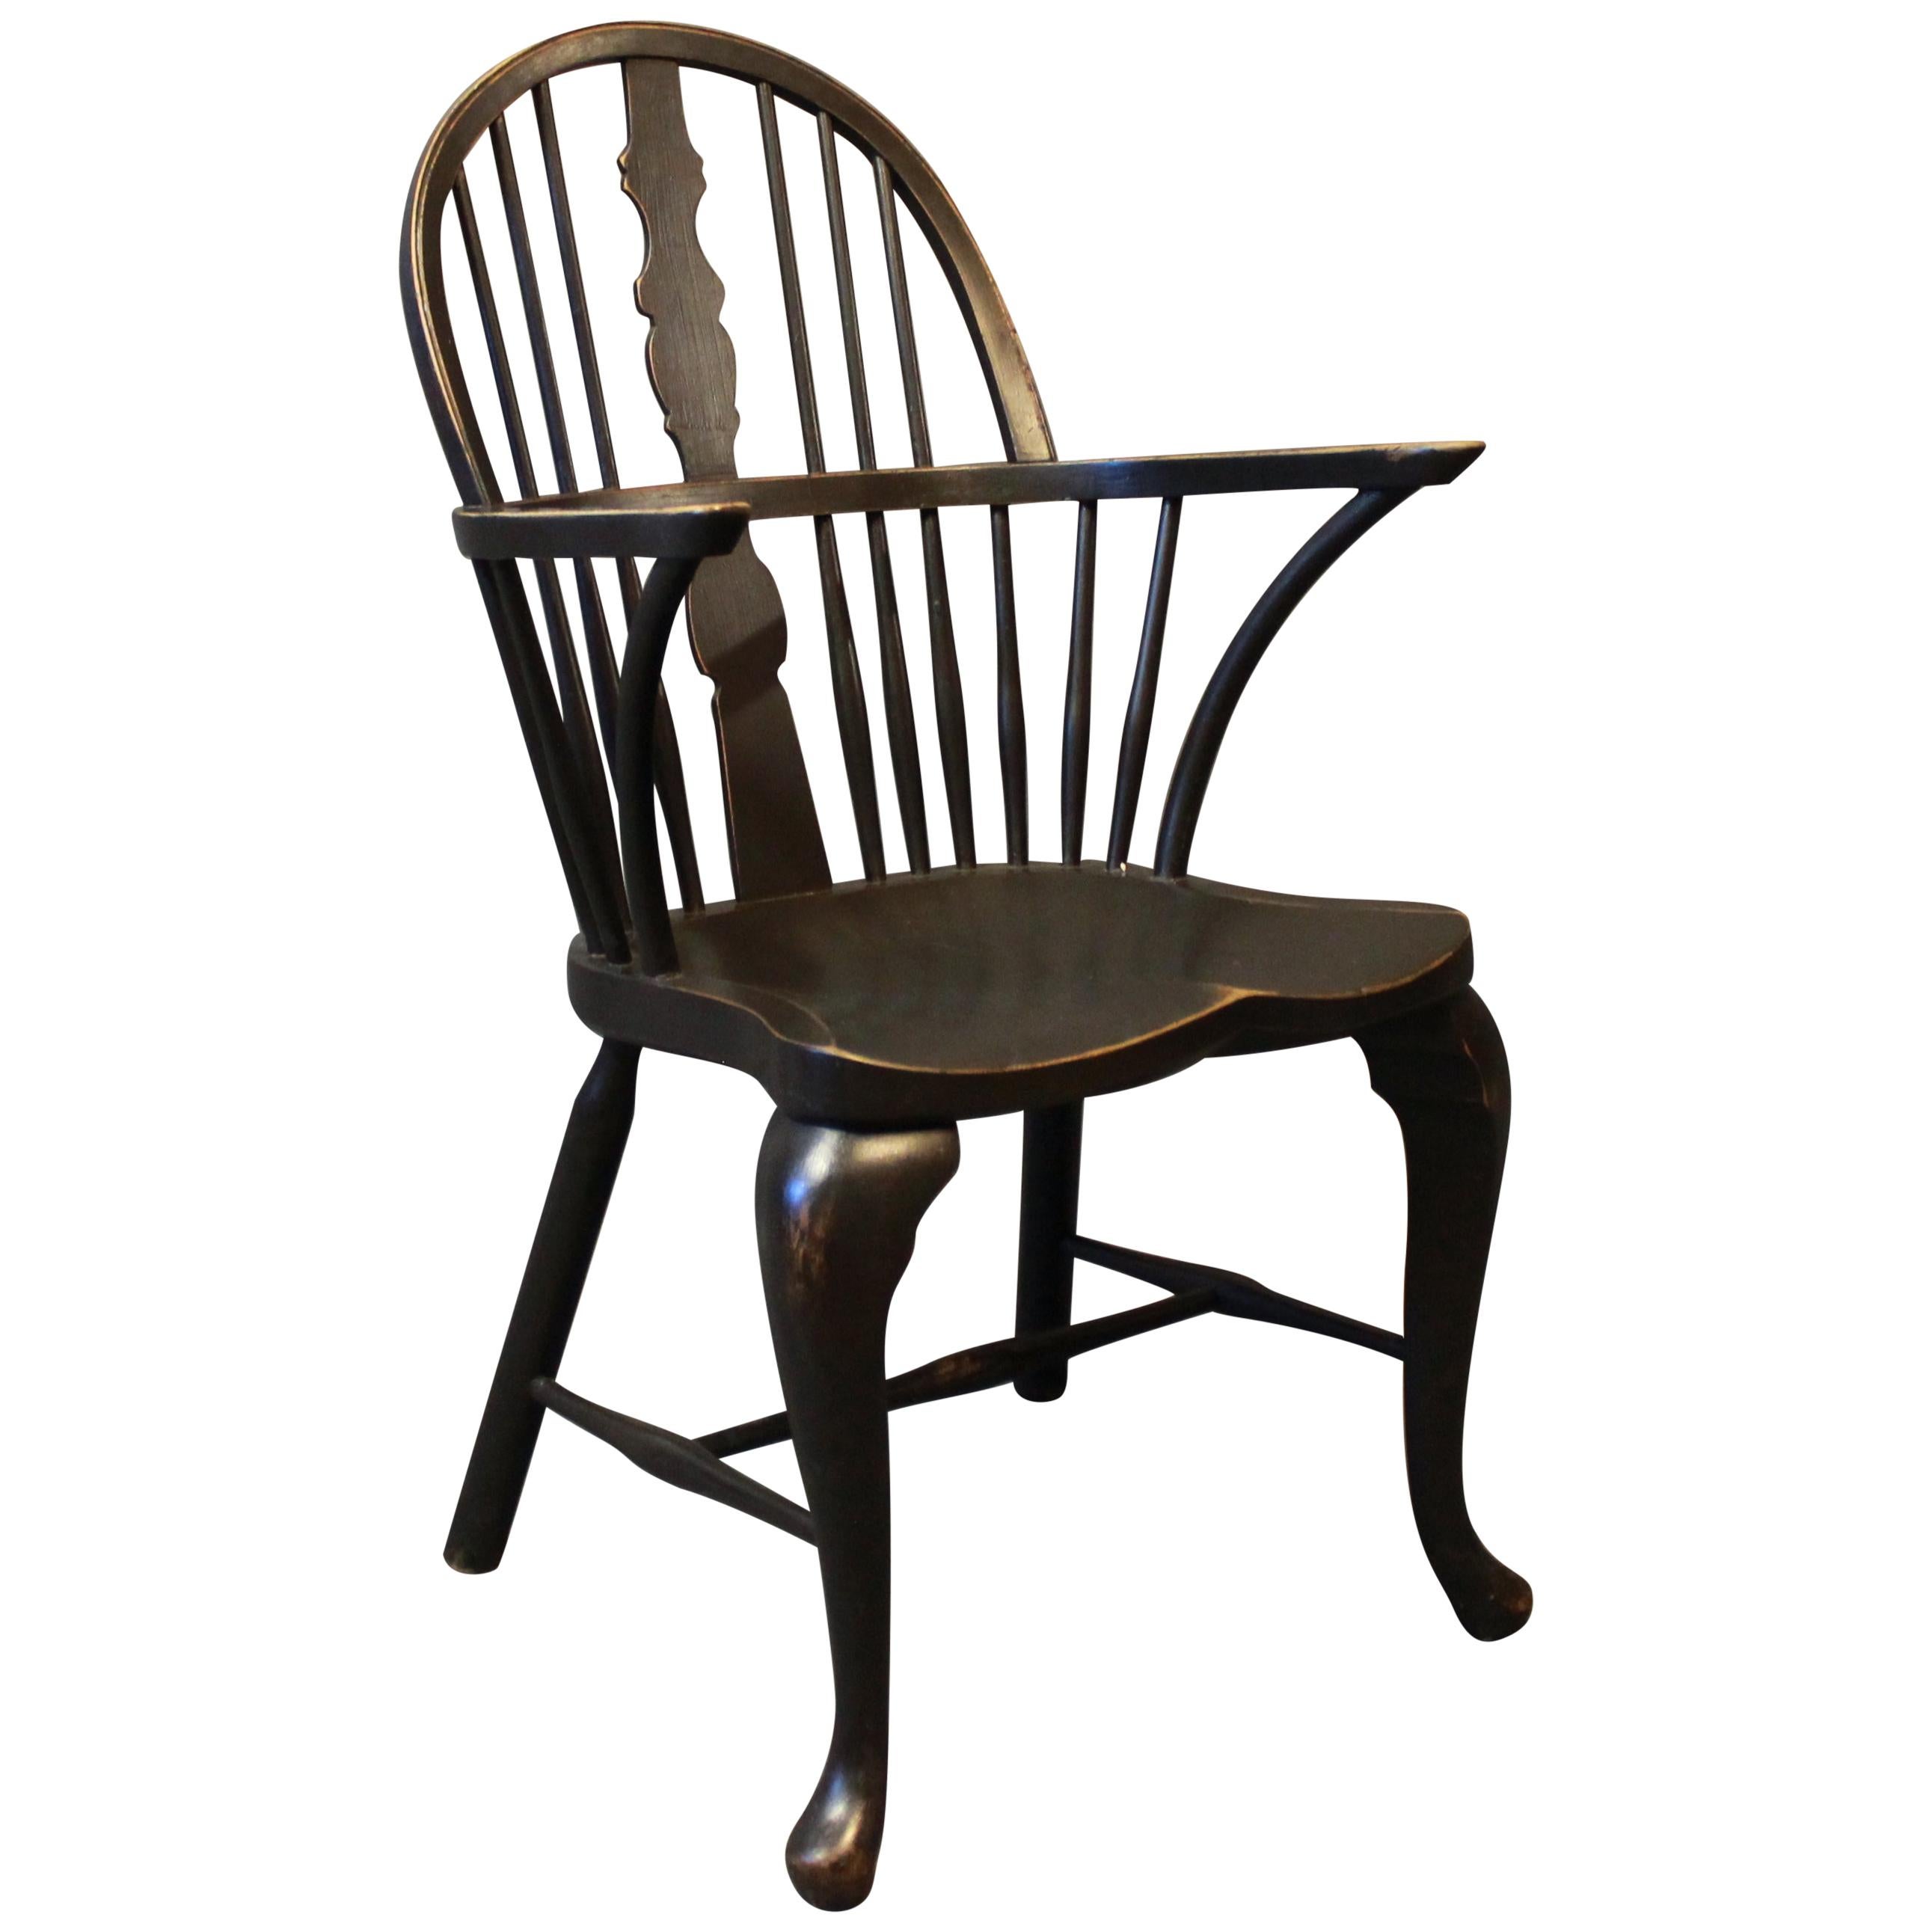 Black Painted Windsor Armchair in Wood from the 1880s